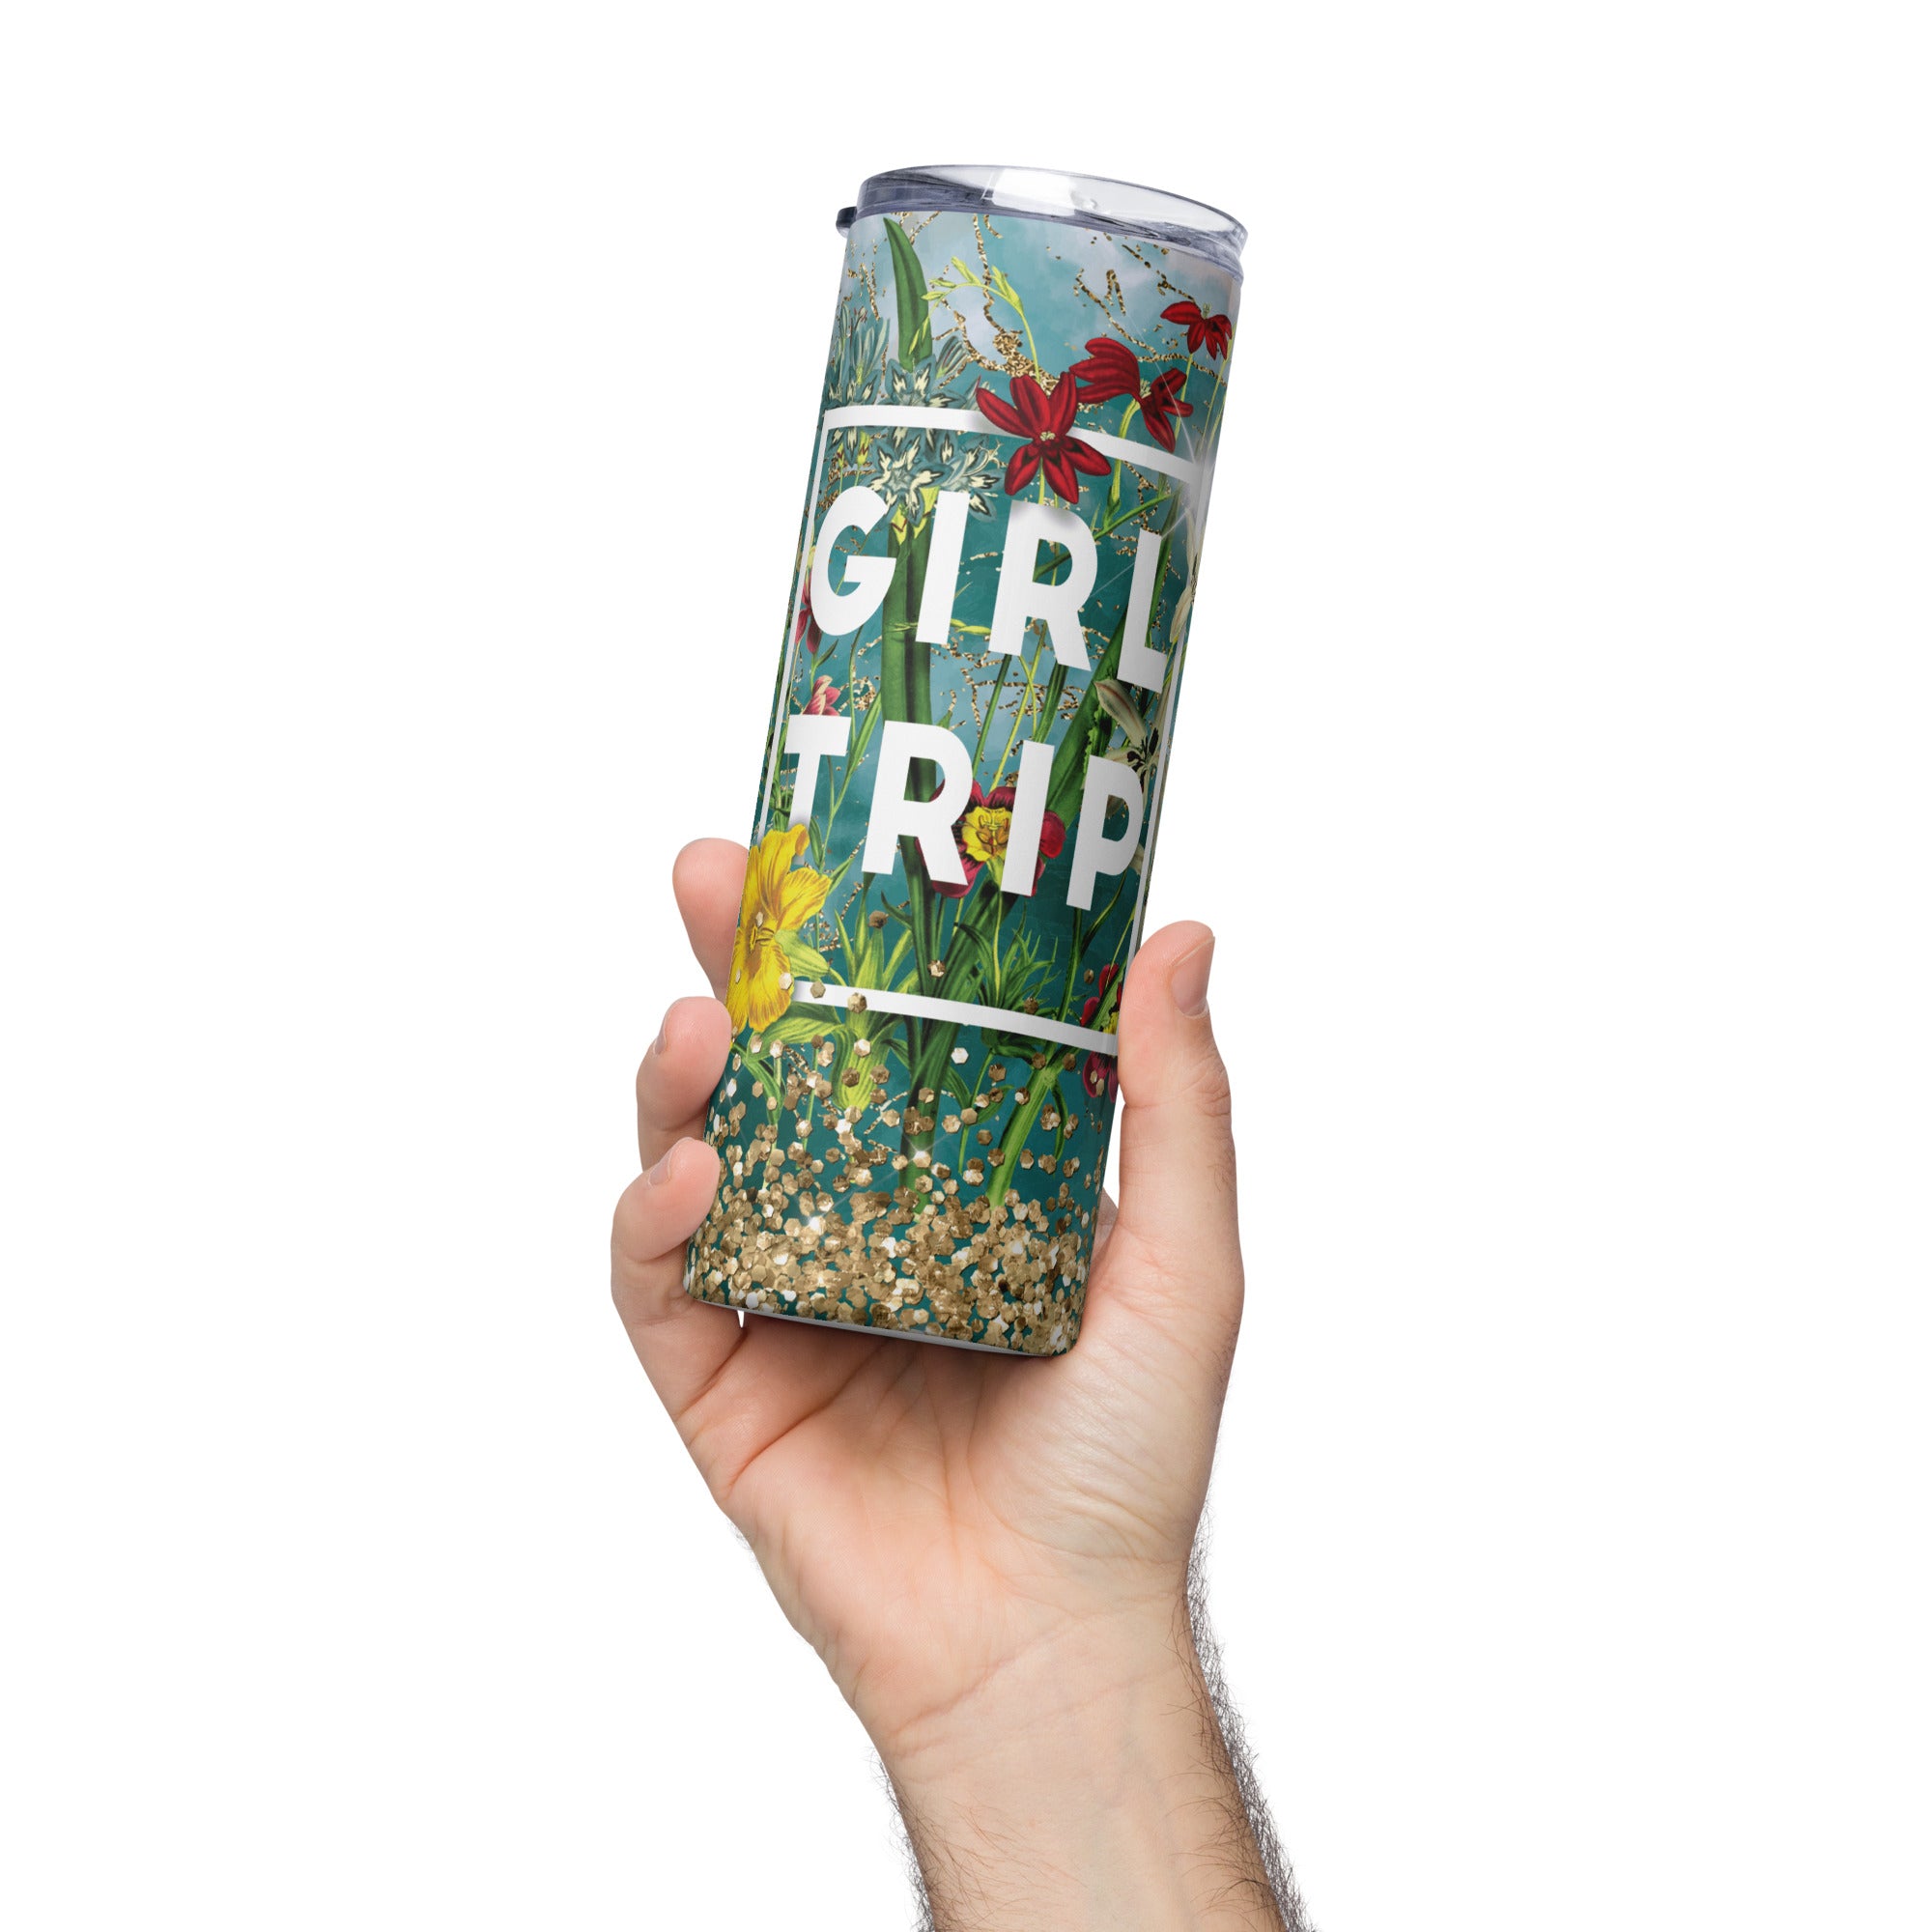 Floral Girl Trip - Stainless Steel Tumbler